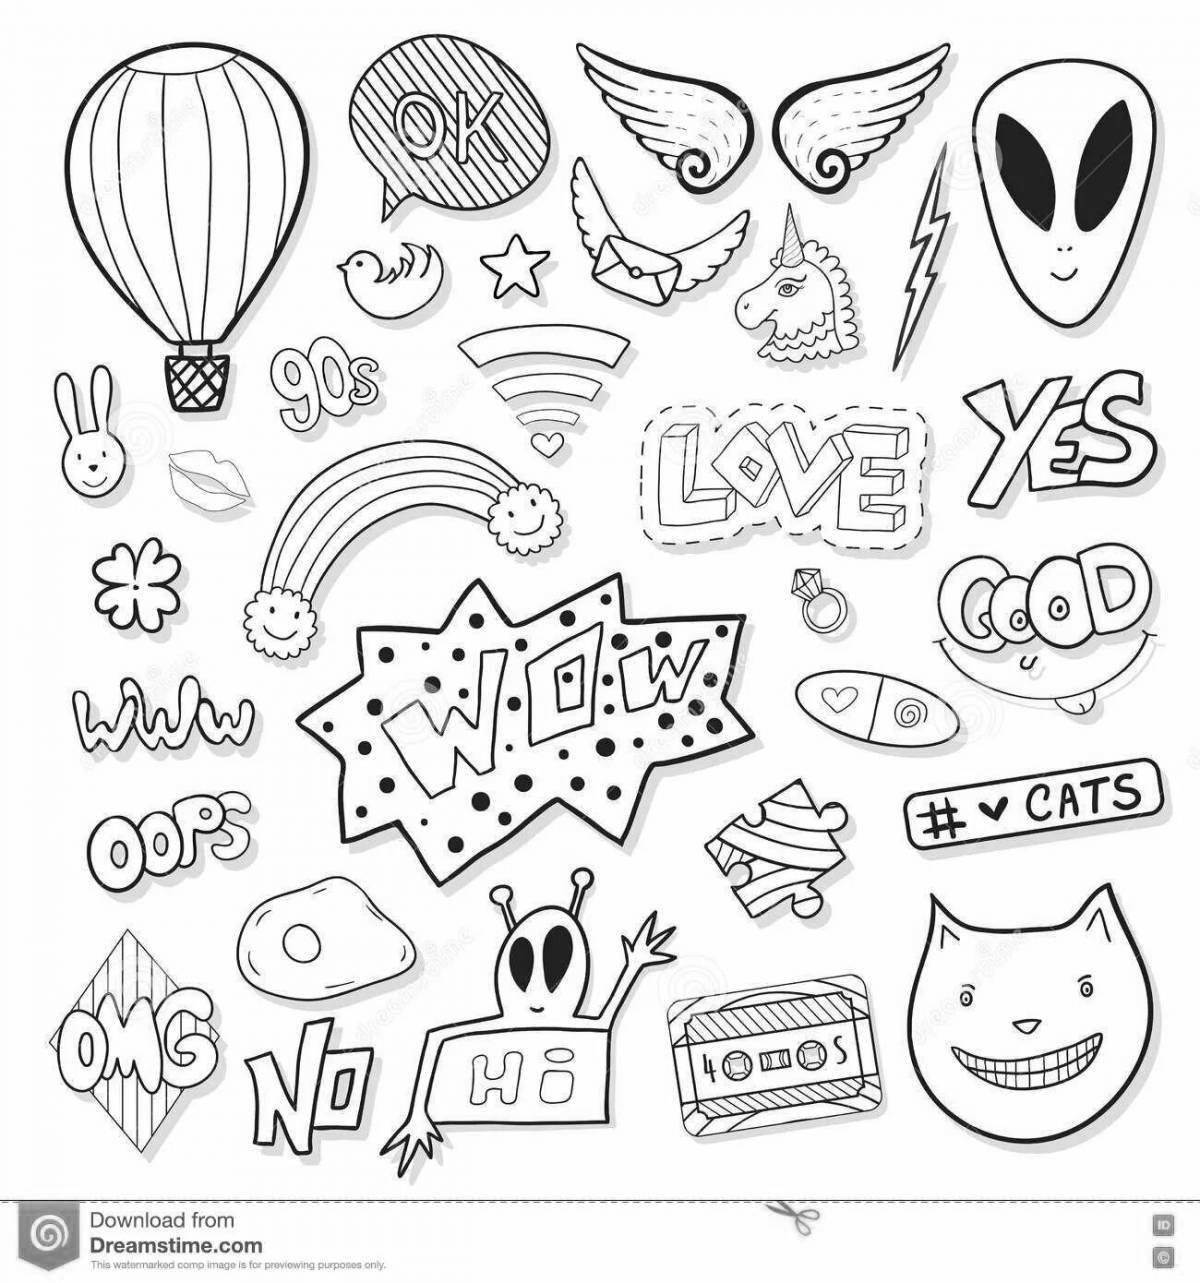 Great coloring pages for stickers